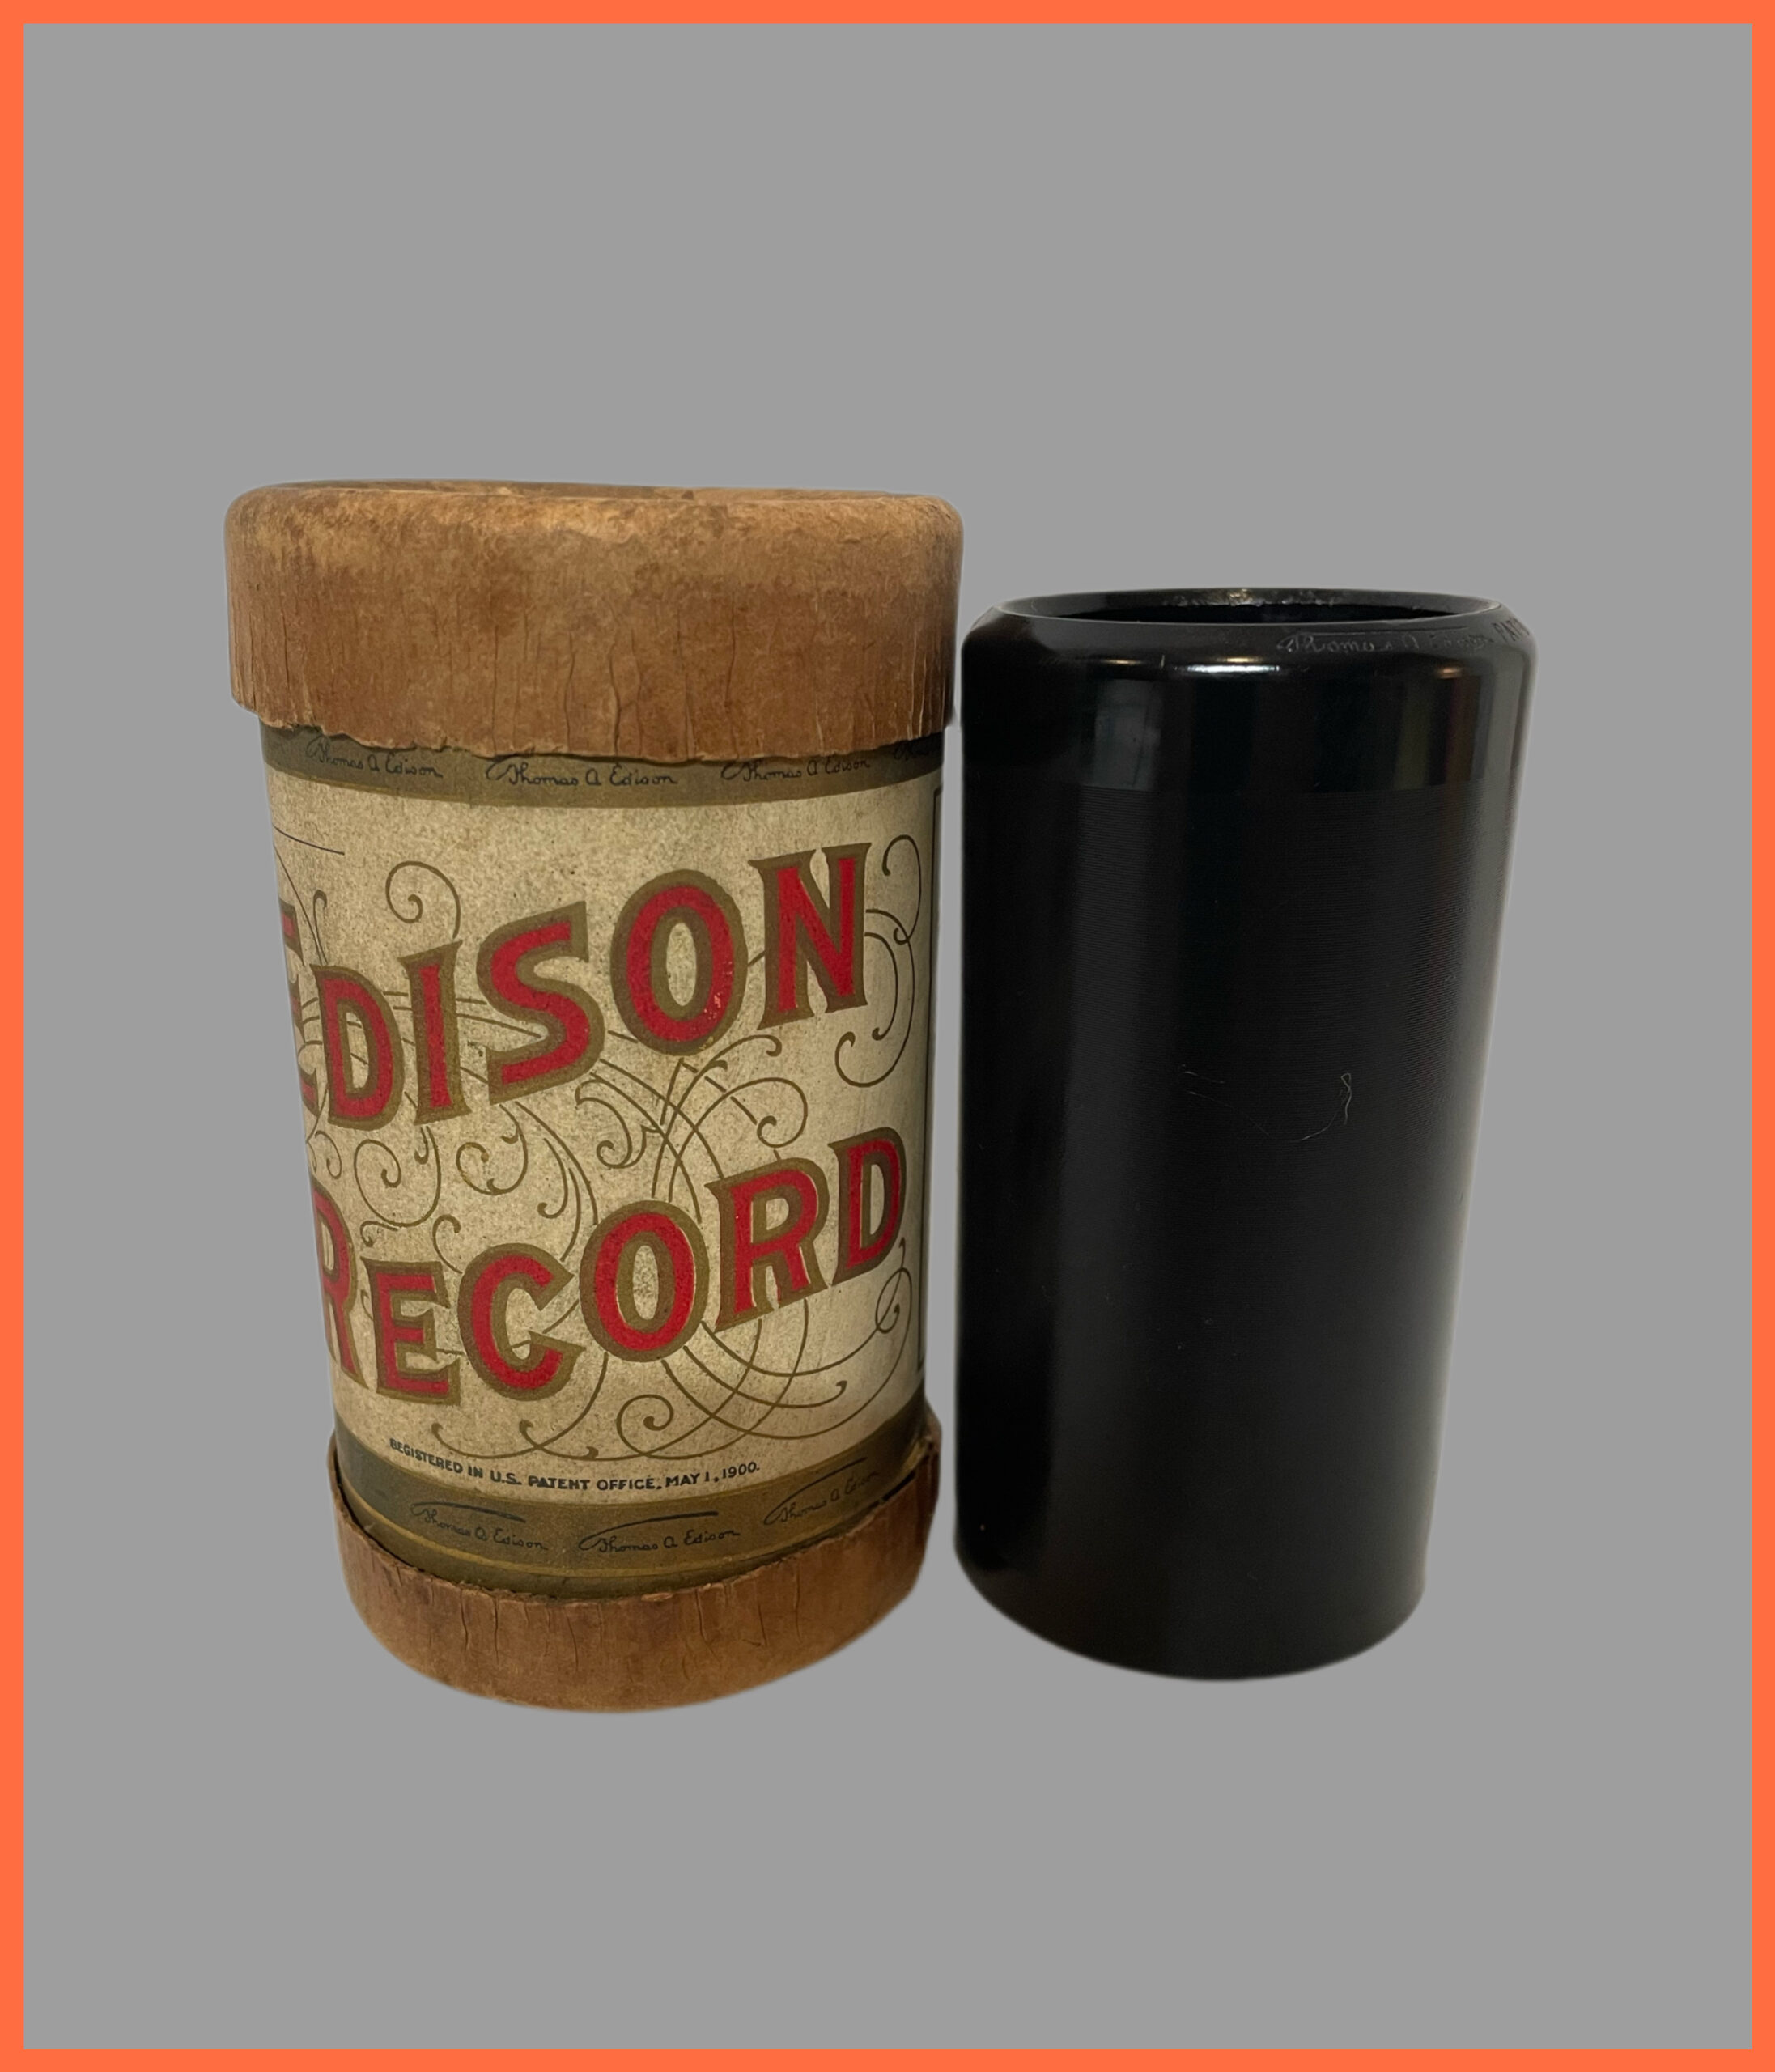 Edison 2-minute Cylinder…”Miserere from Il Trovatore”